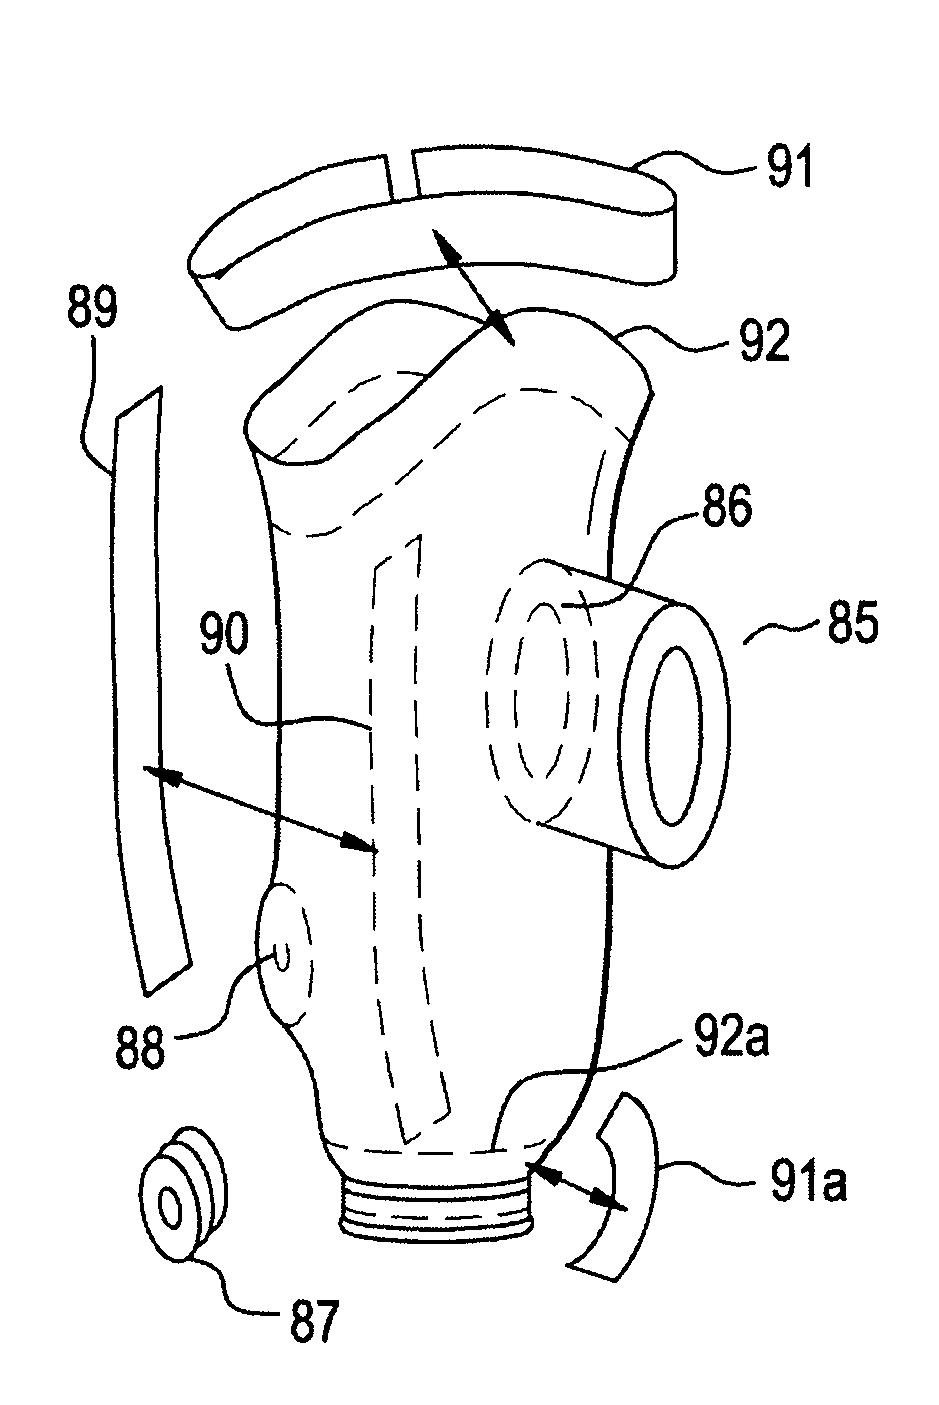 Braided prosthetic sockets with attachment plates and methods of manufacture